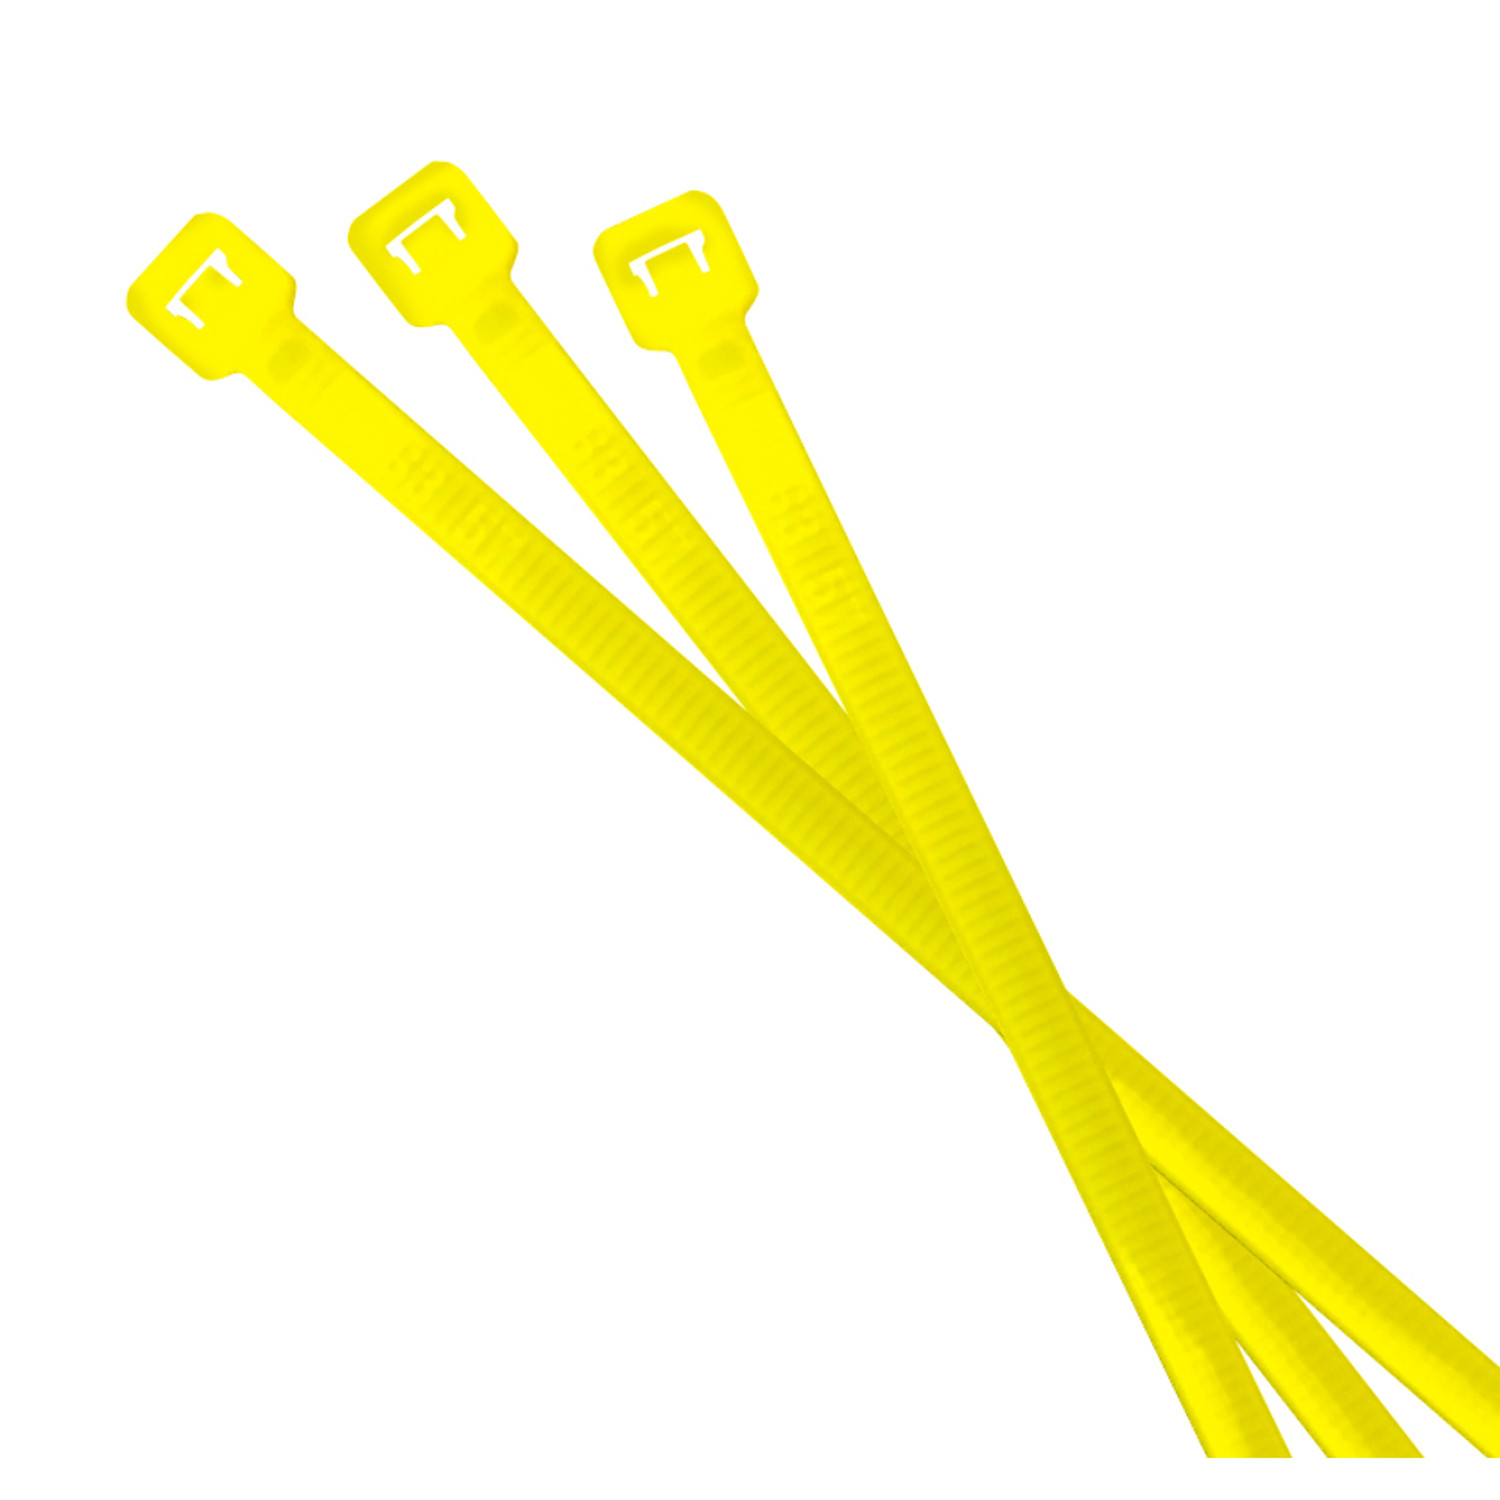 Riesel Design Cable Tie Cable:tie Neon Yellow, 25 Pieces